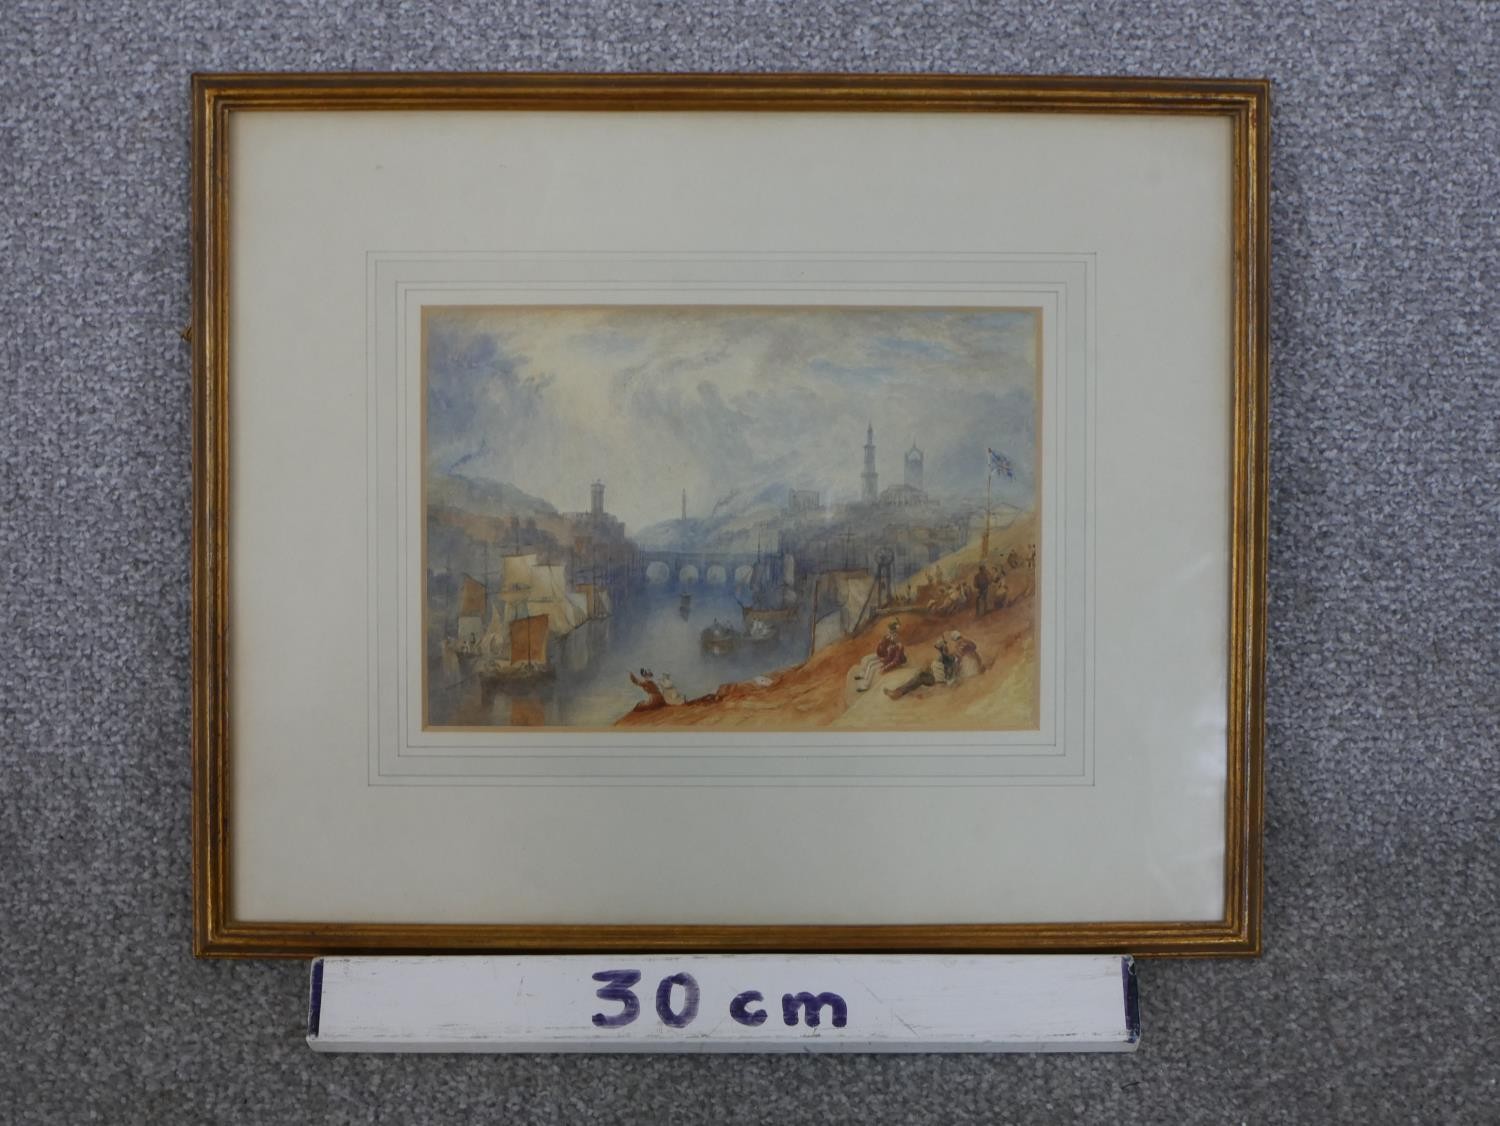 After Joseph Mallord William Turner, Newcastle upon Tyne, watercolour on paper, unsigned. H.33 W. - Image 3 of 5